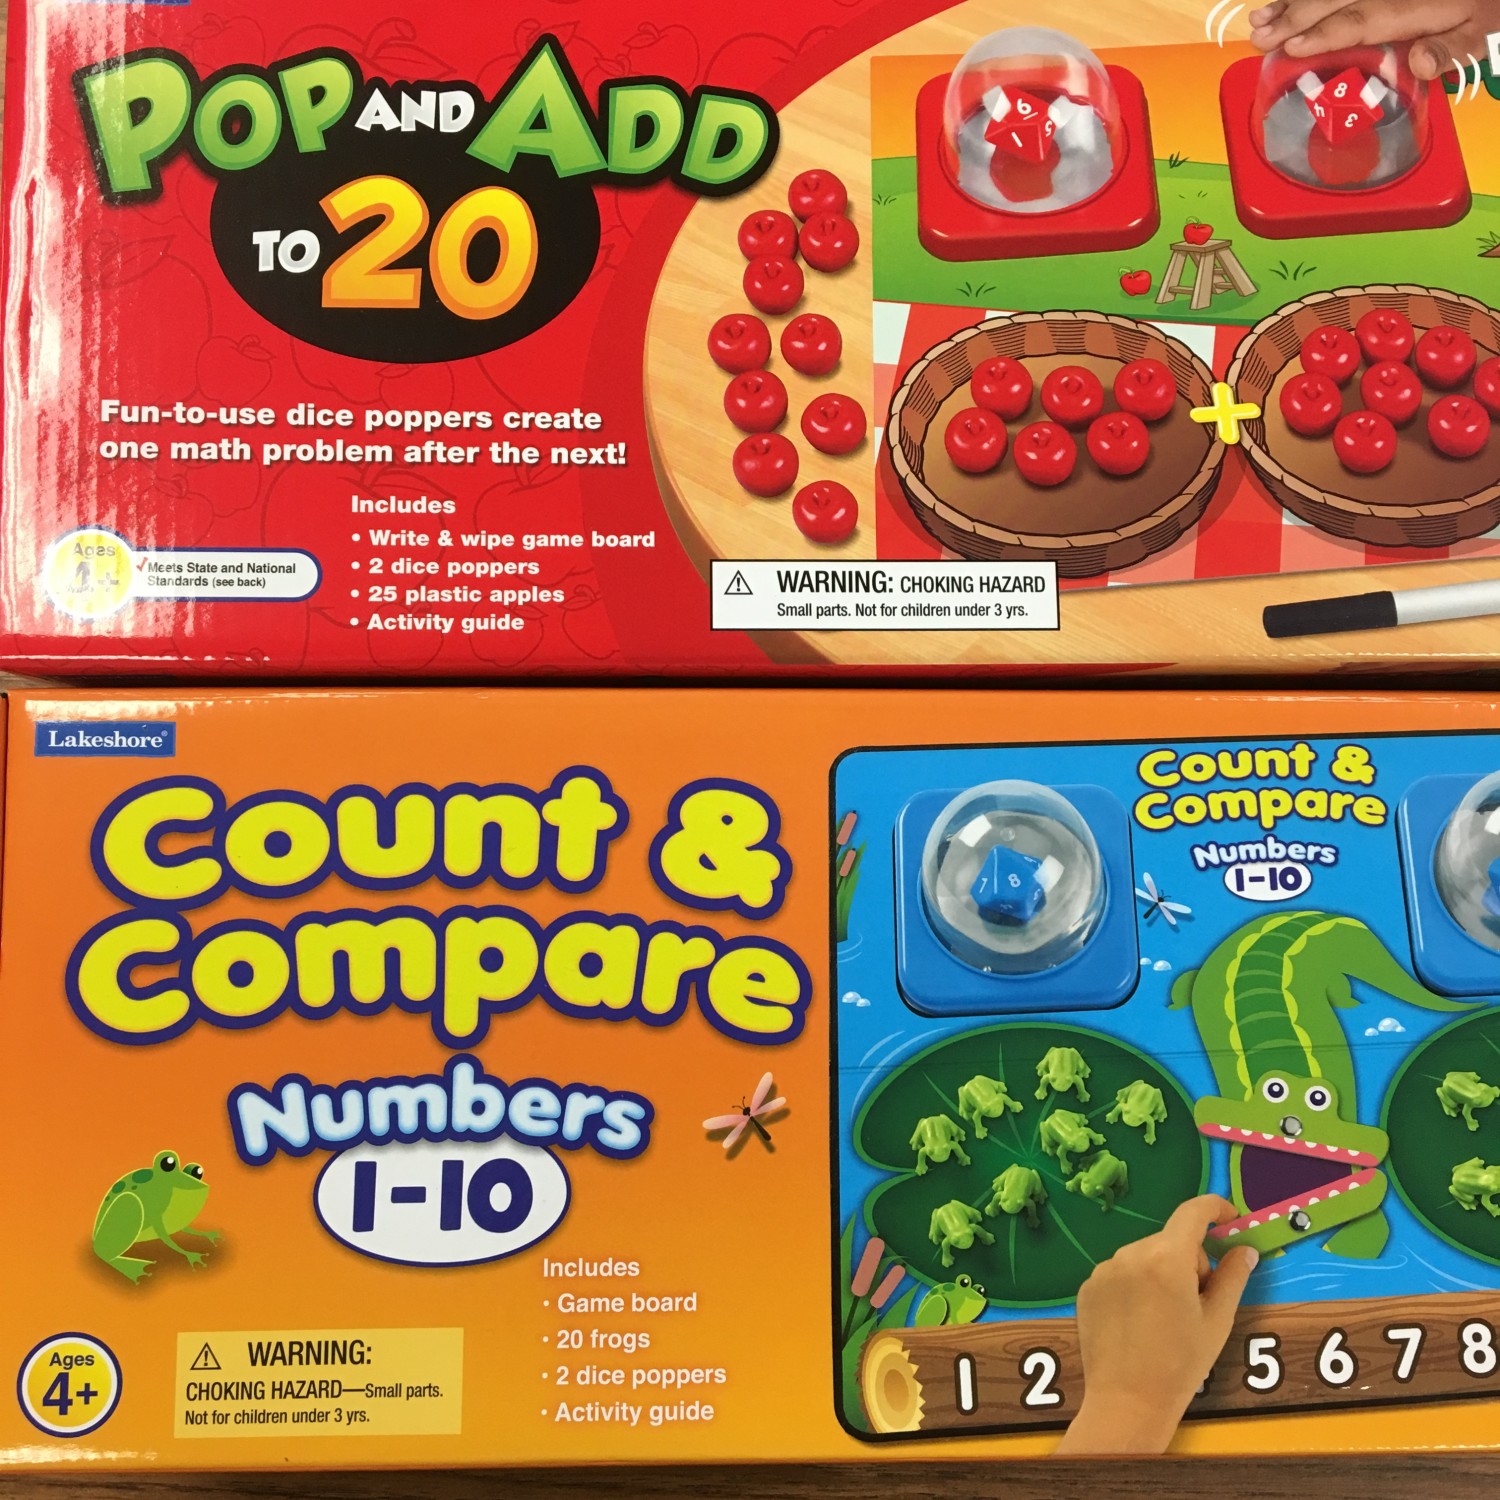 Pop and Add to 20 and Count and Compare numbers to 1-10